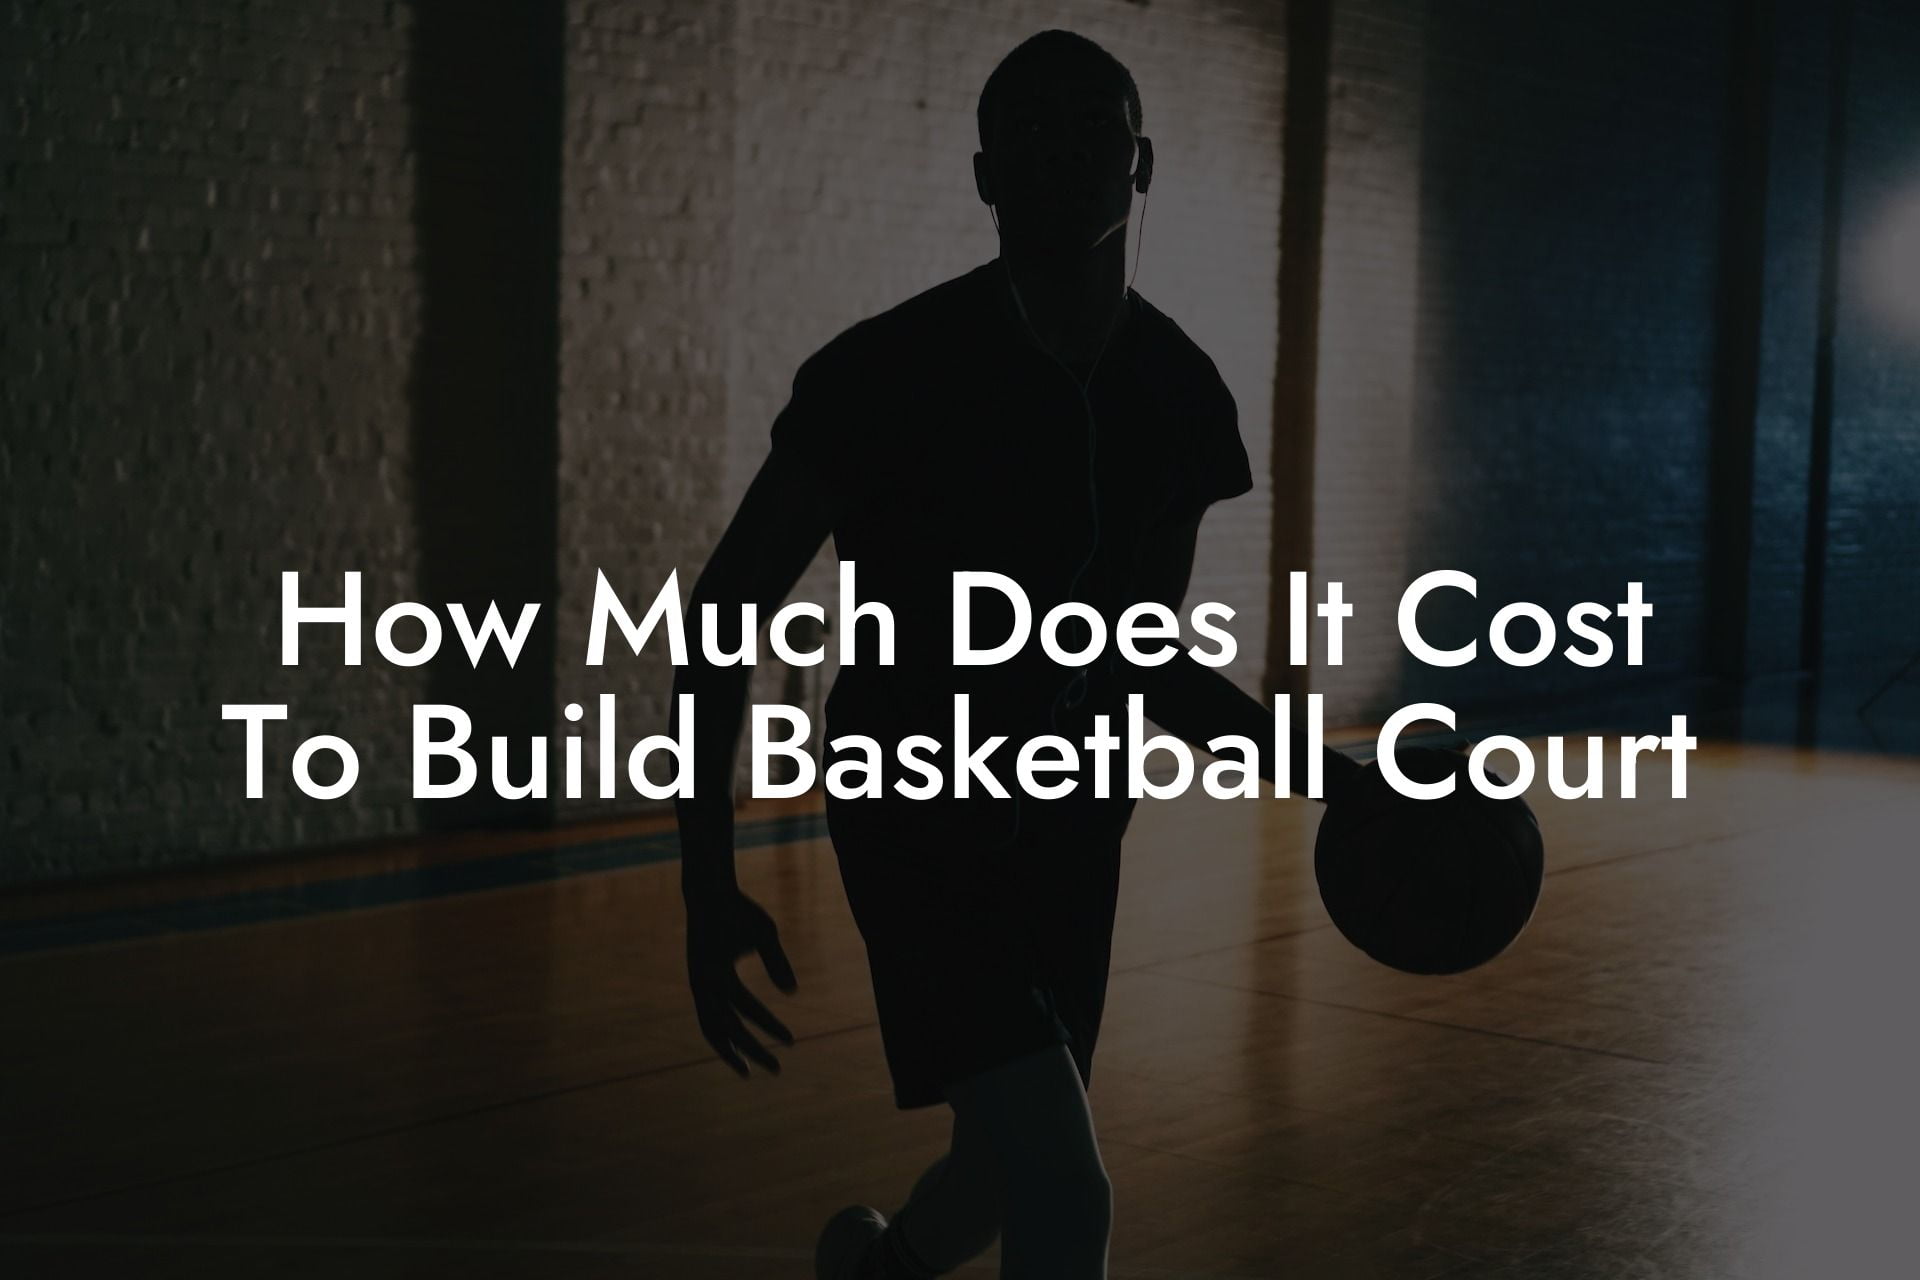 How Much Does It Cost To Build Basketball Court Triple Threat Tactics